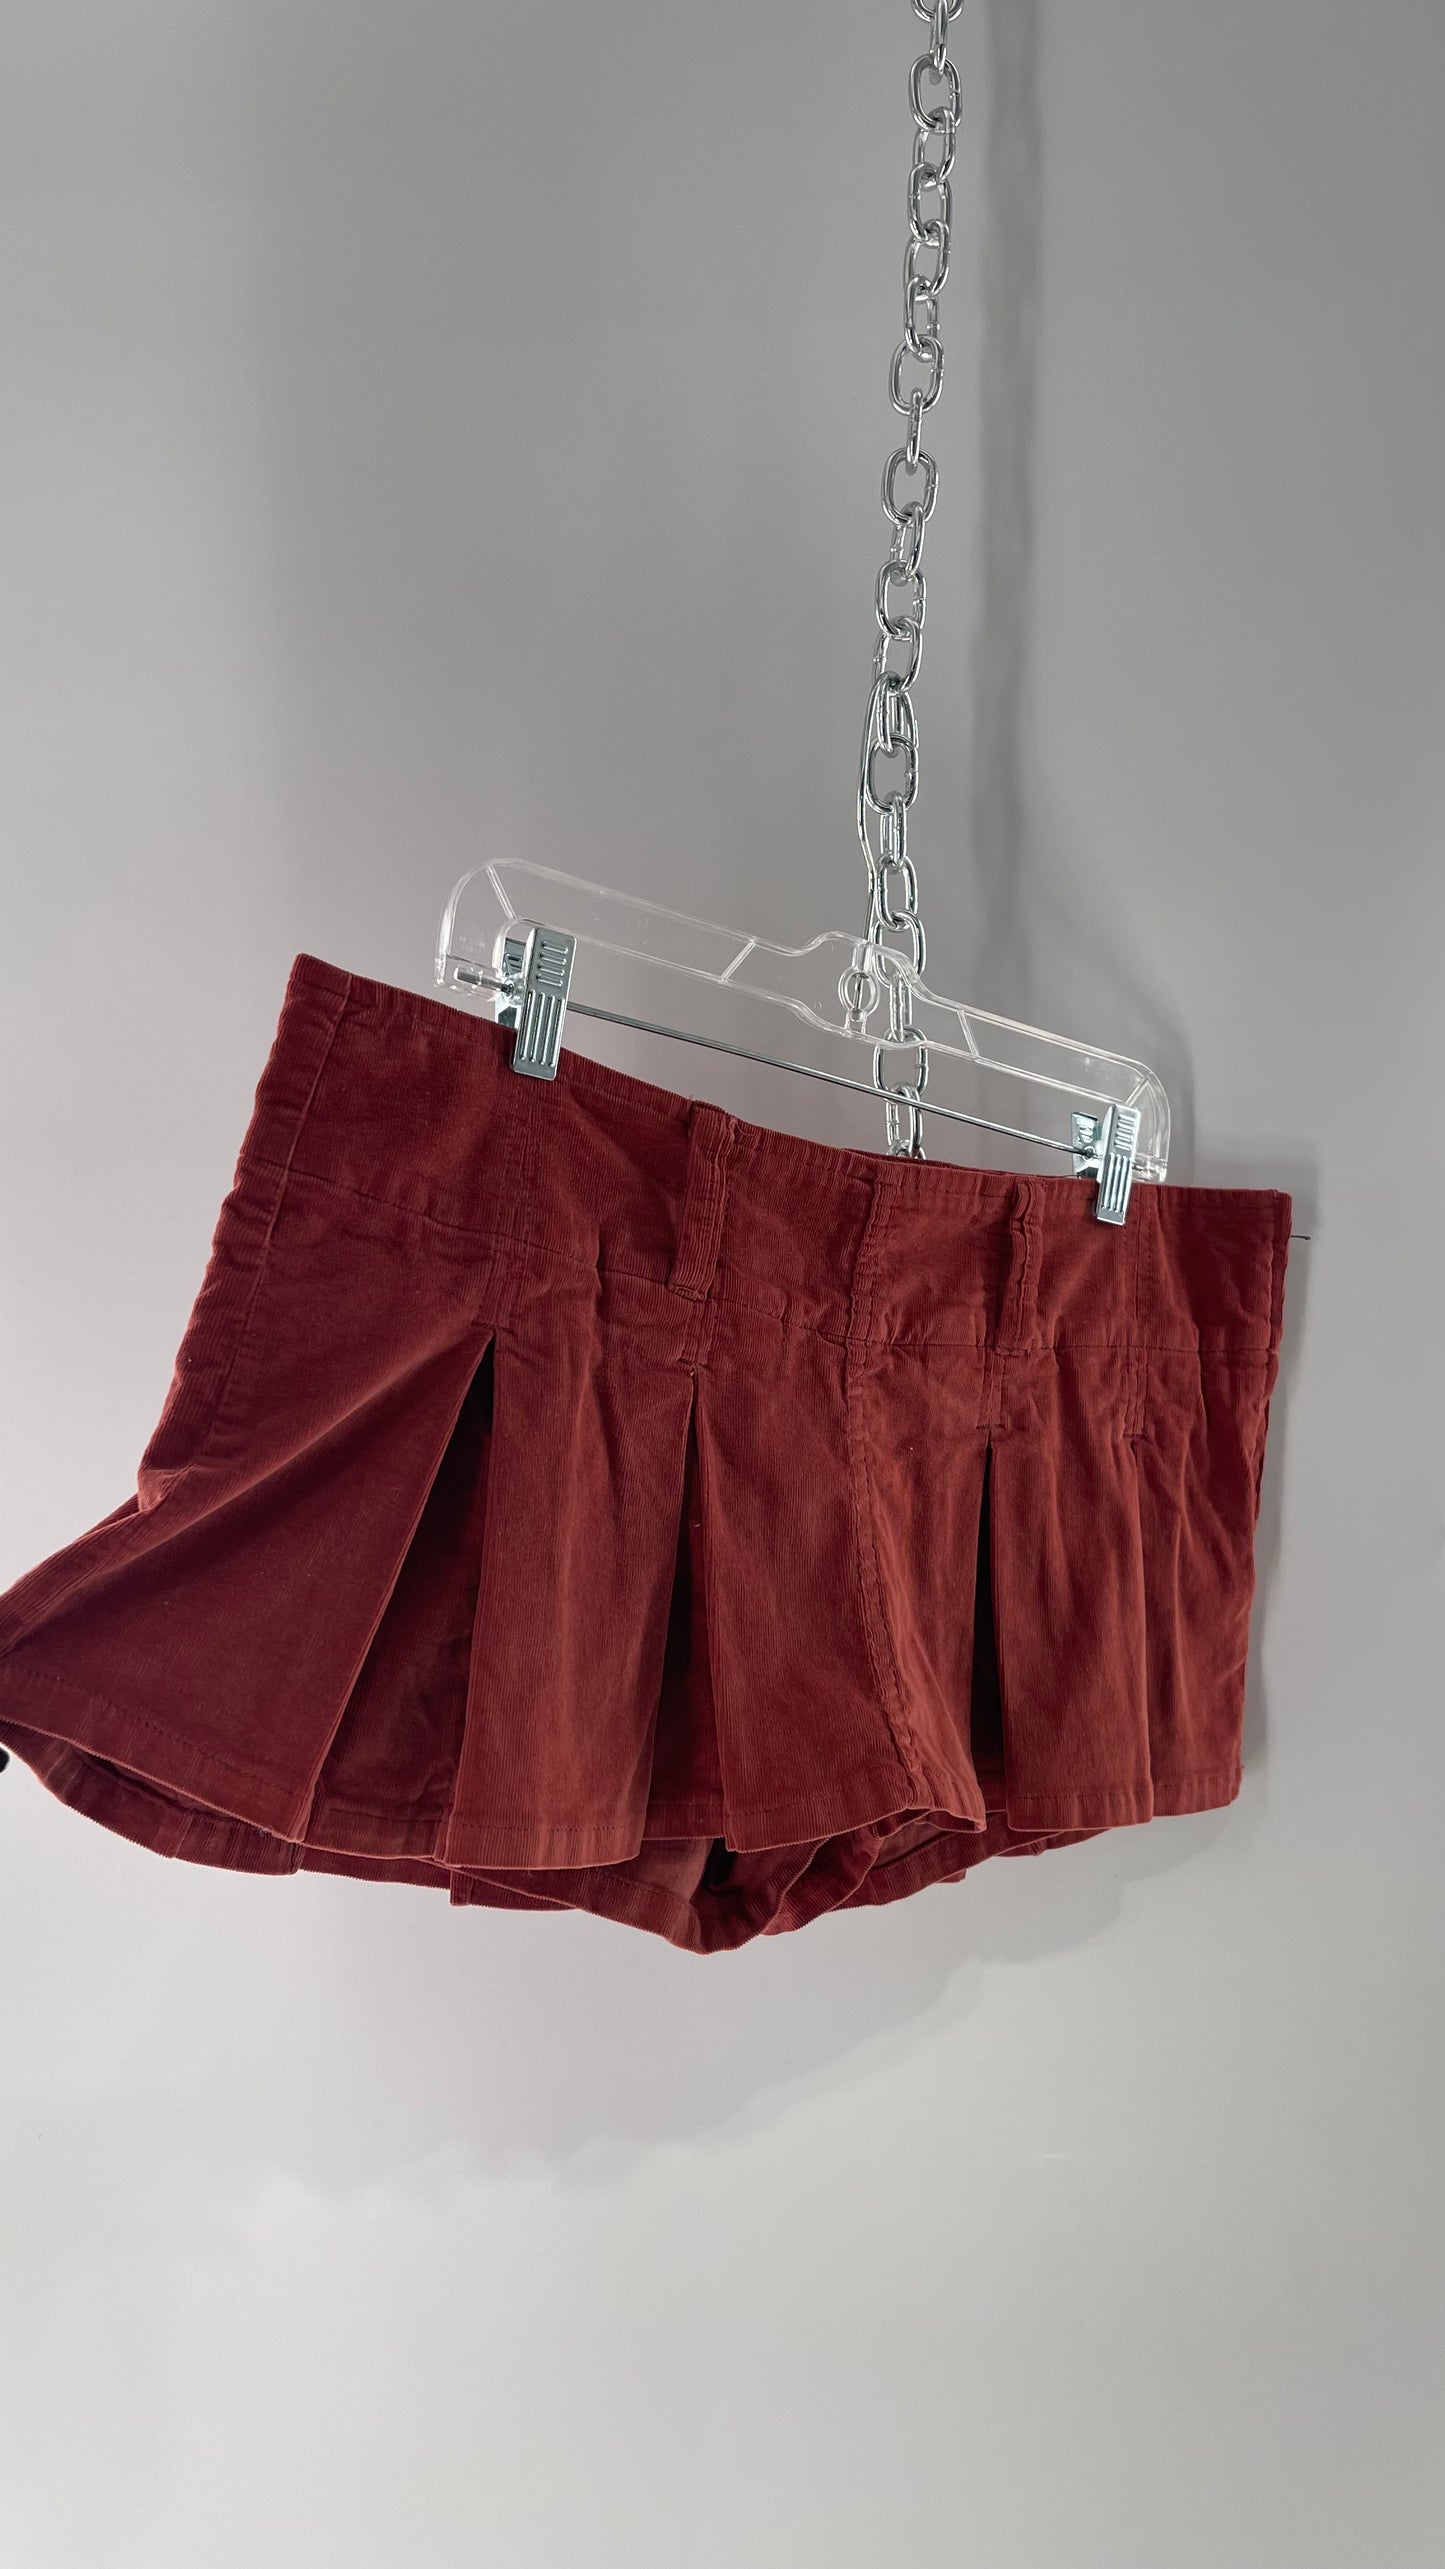 Free People Corduroy Terracotta Pleated Micro Mini Skirt with Tags Attached (6)